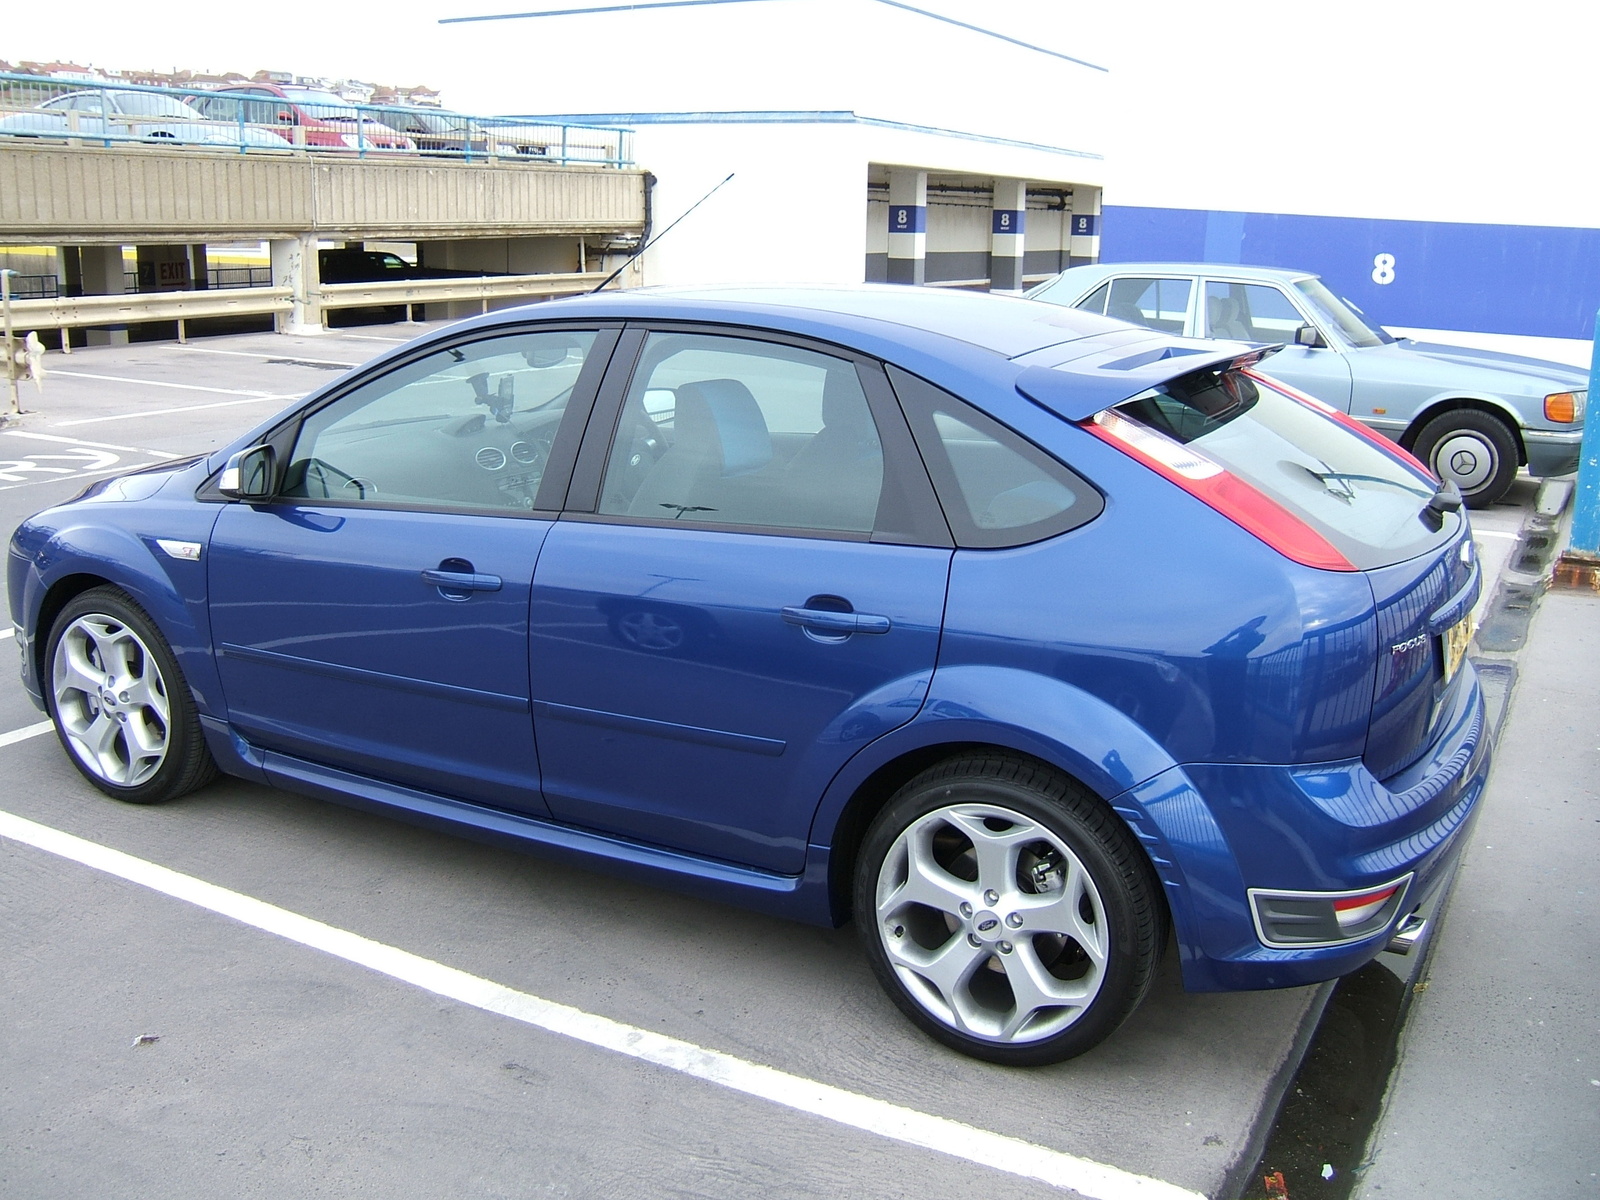 2006 Ford focus zx4 st turbo